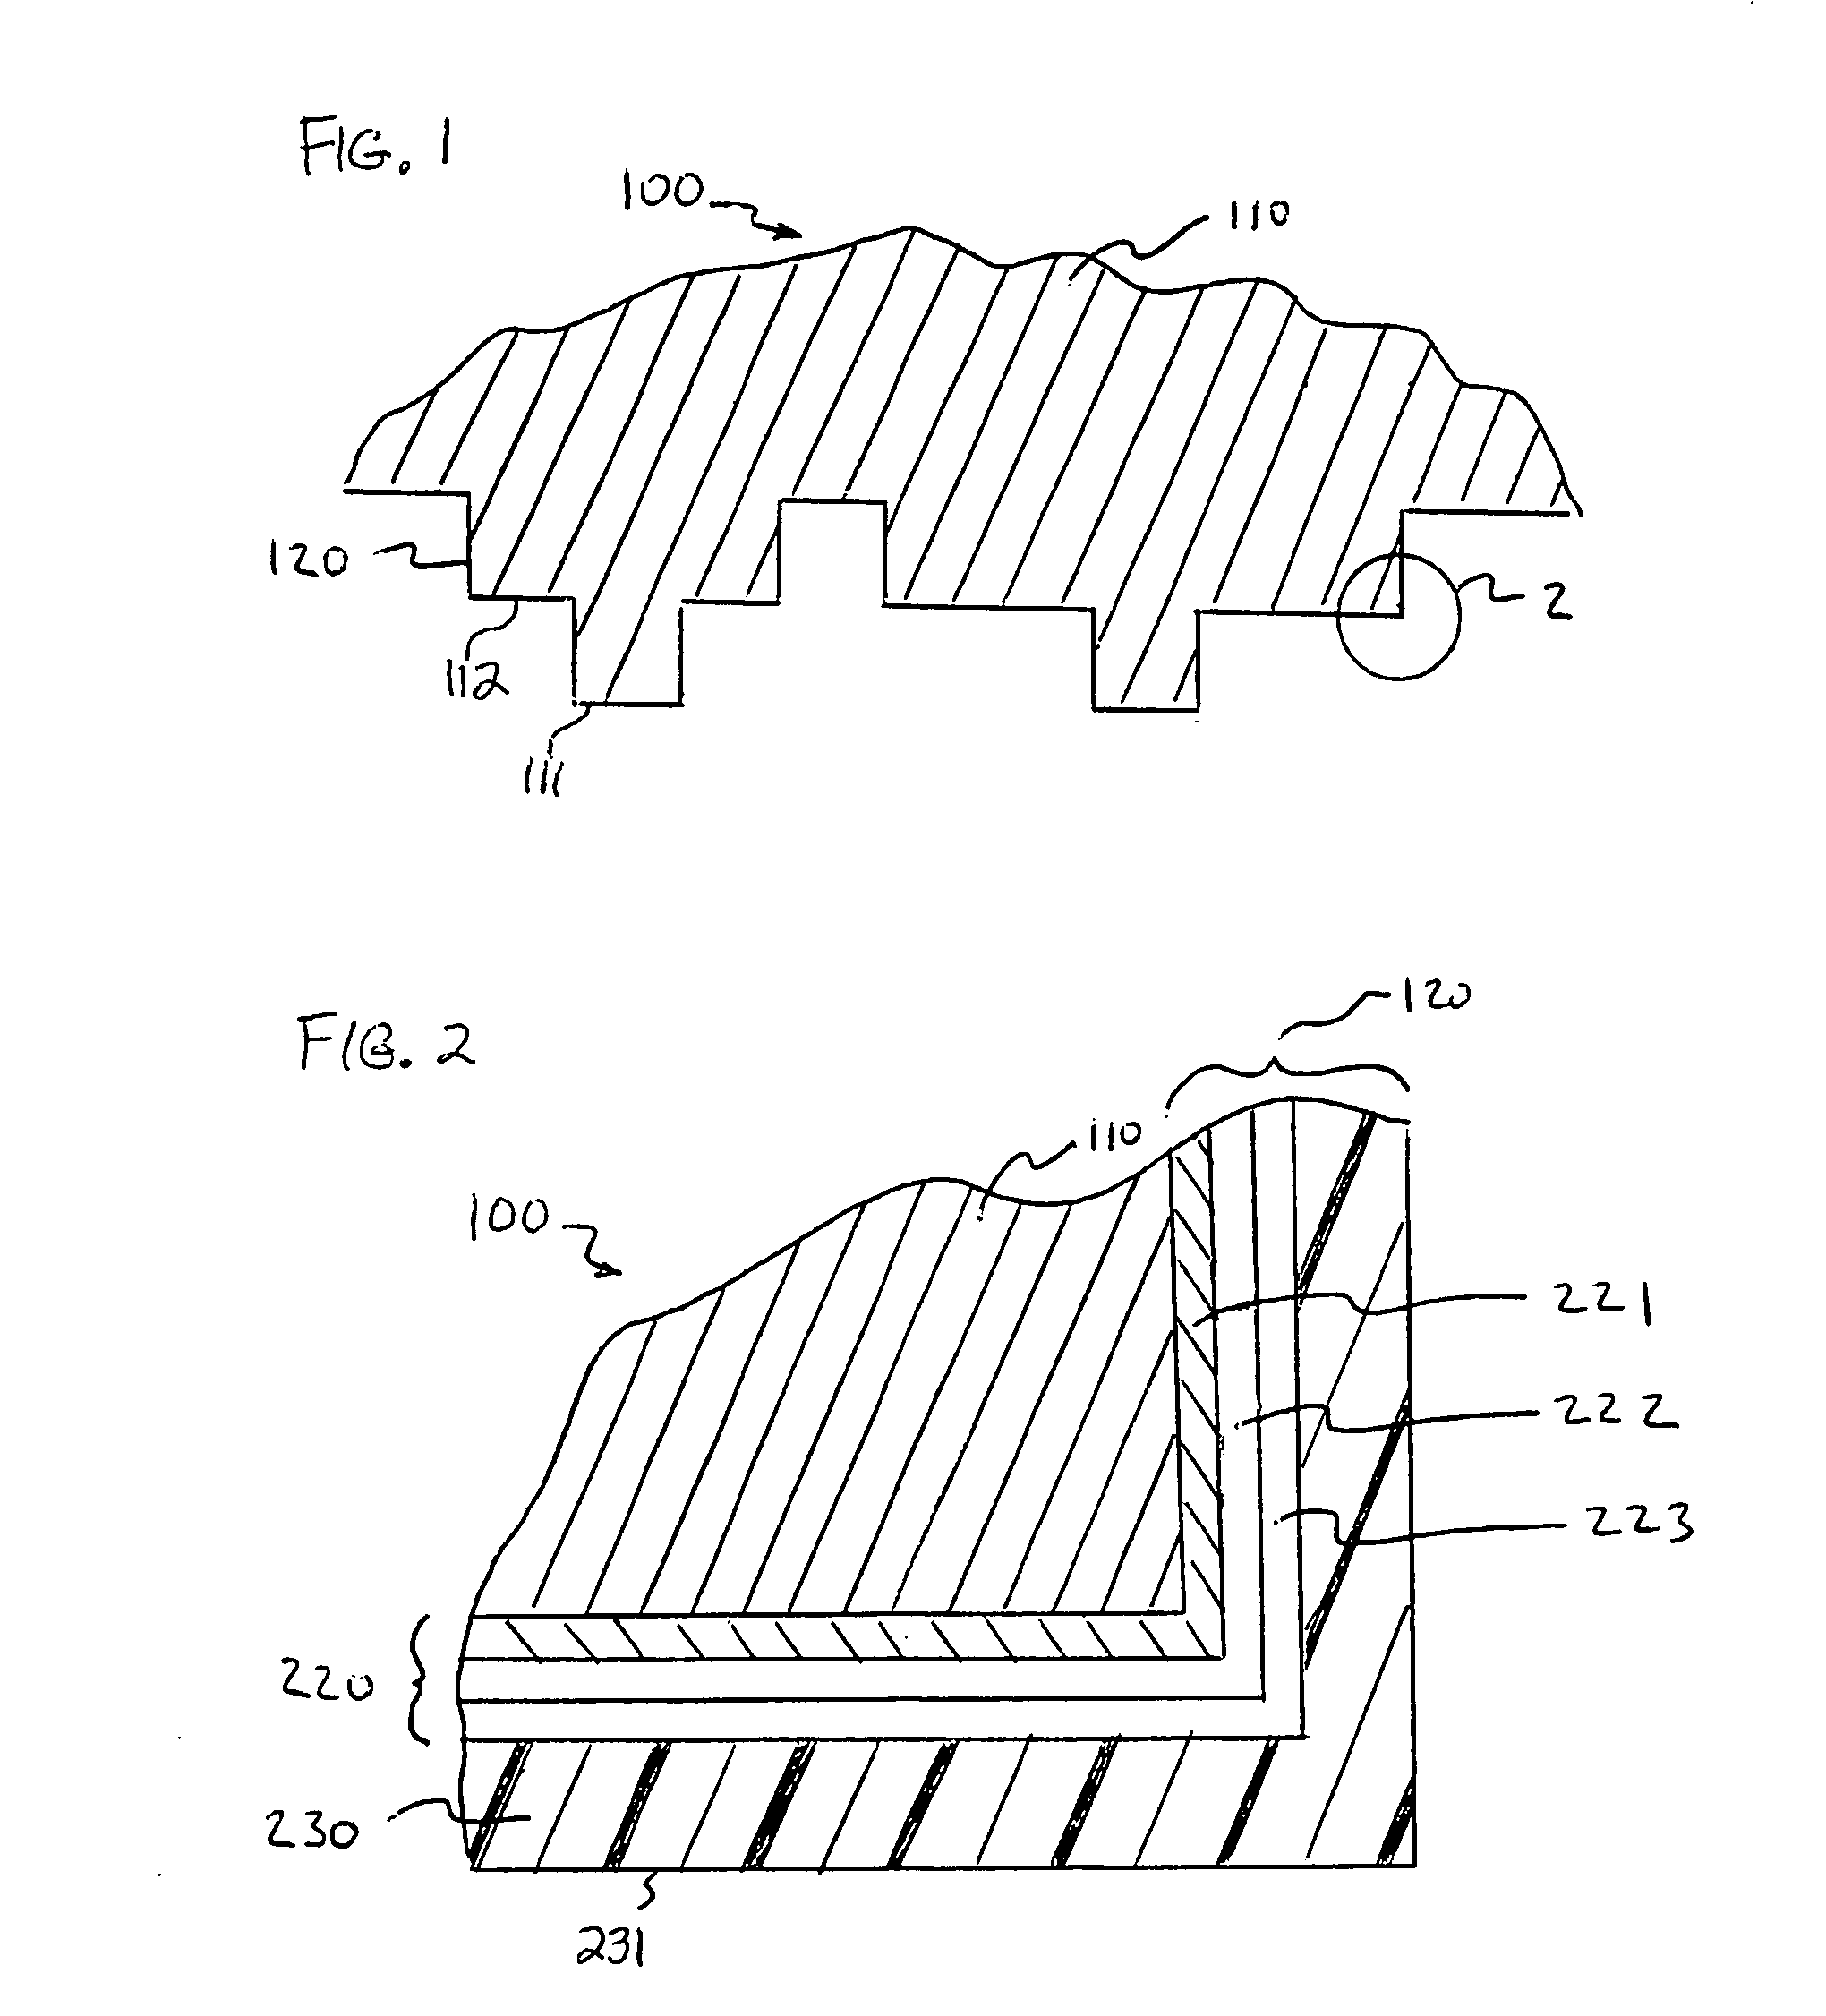 Component packaging apparatus, systems, and methods